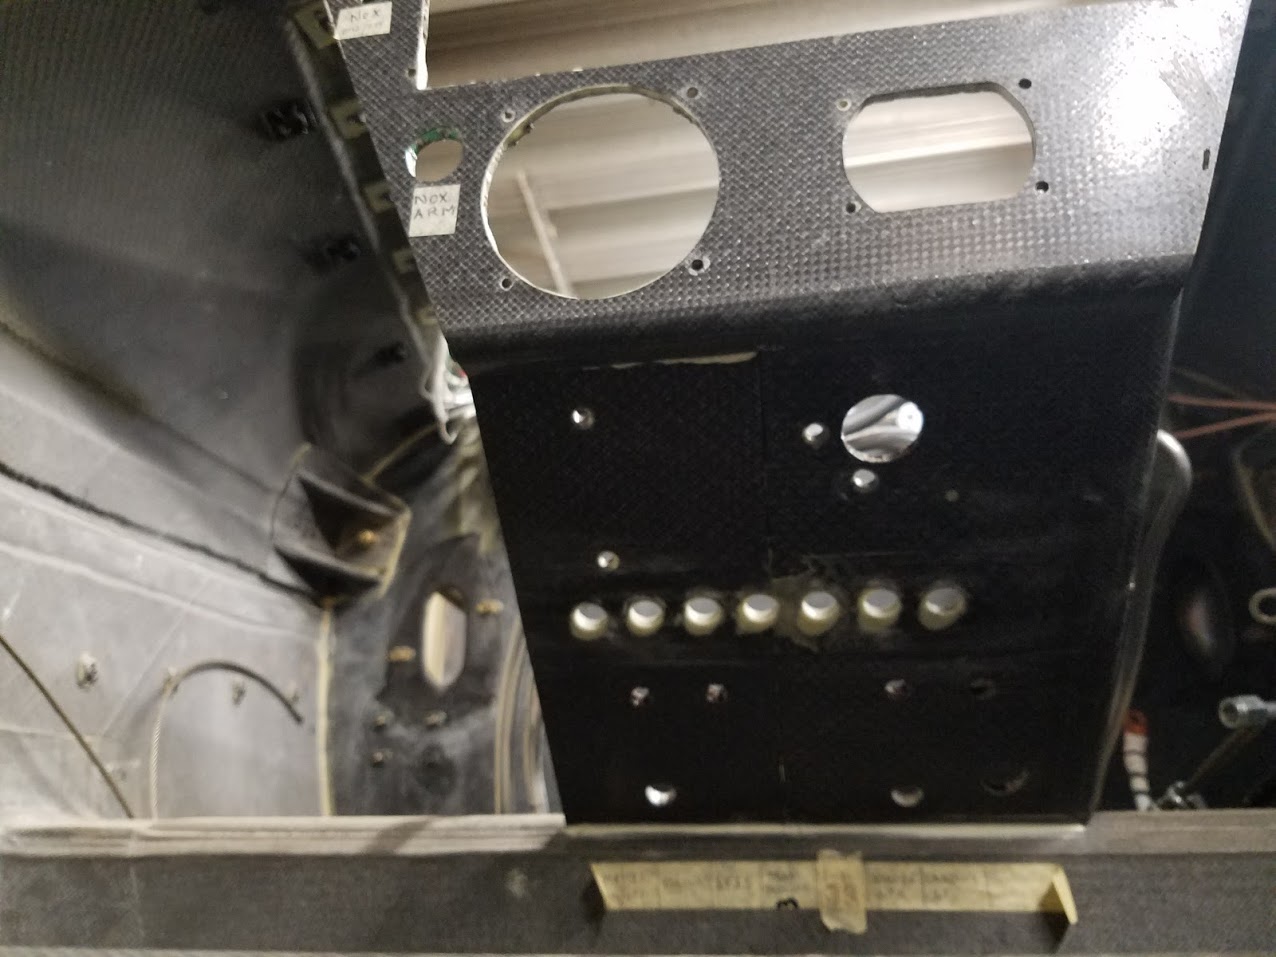 "After" view - front panel lower